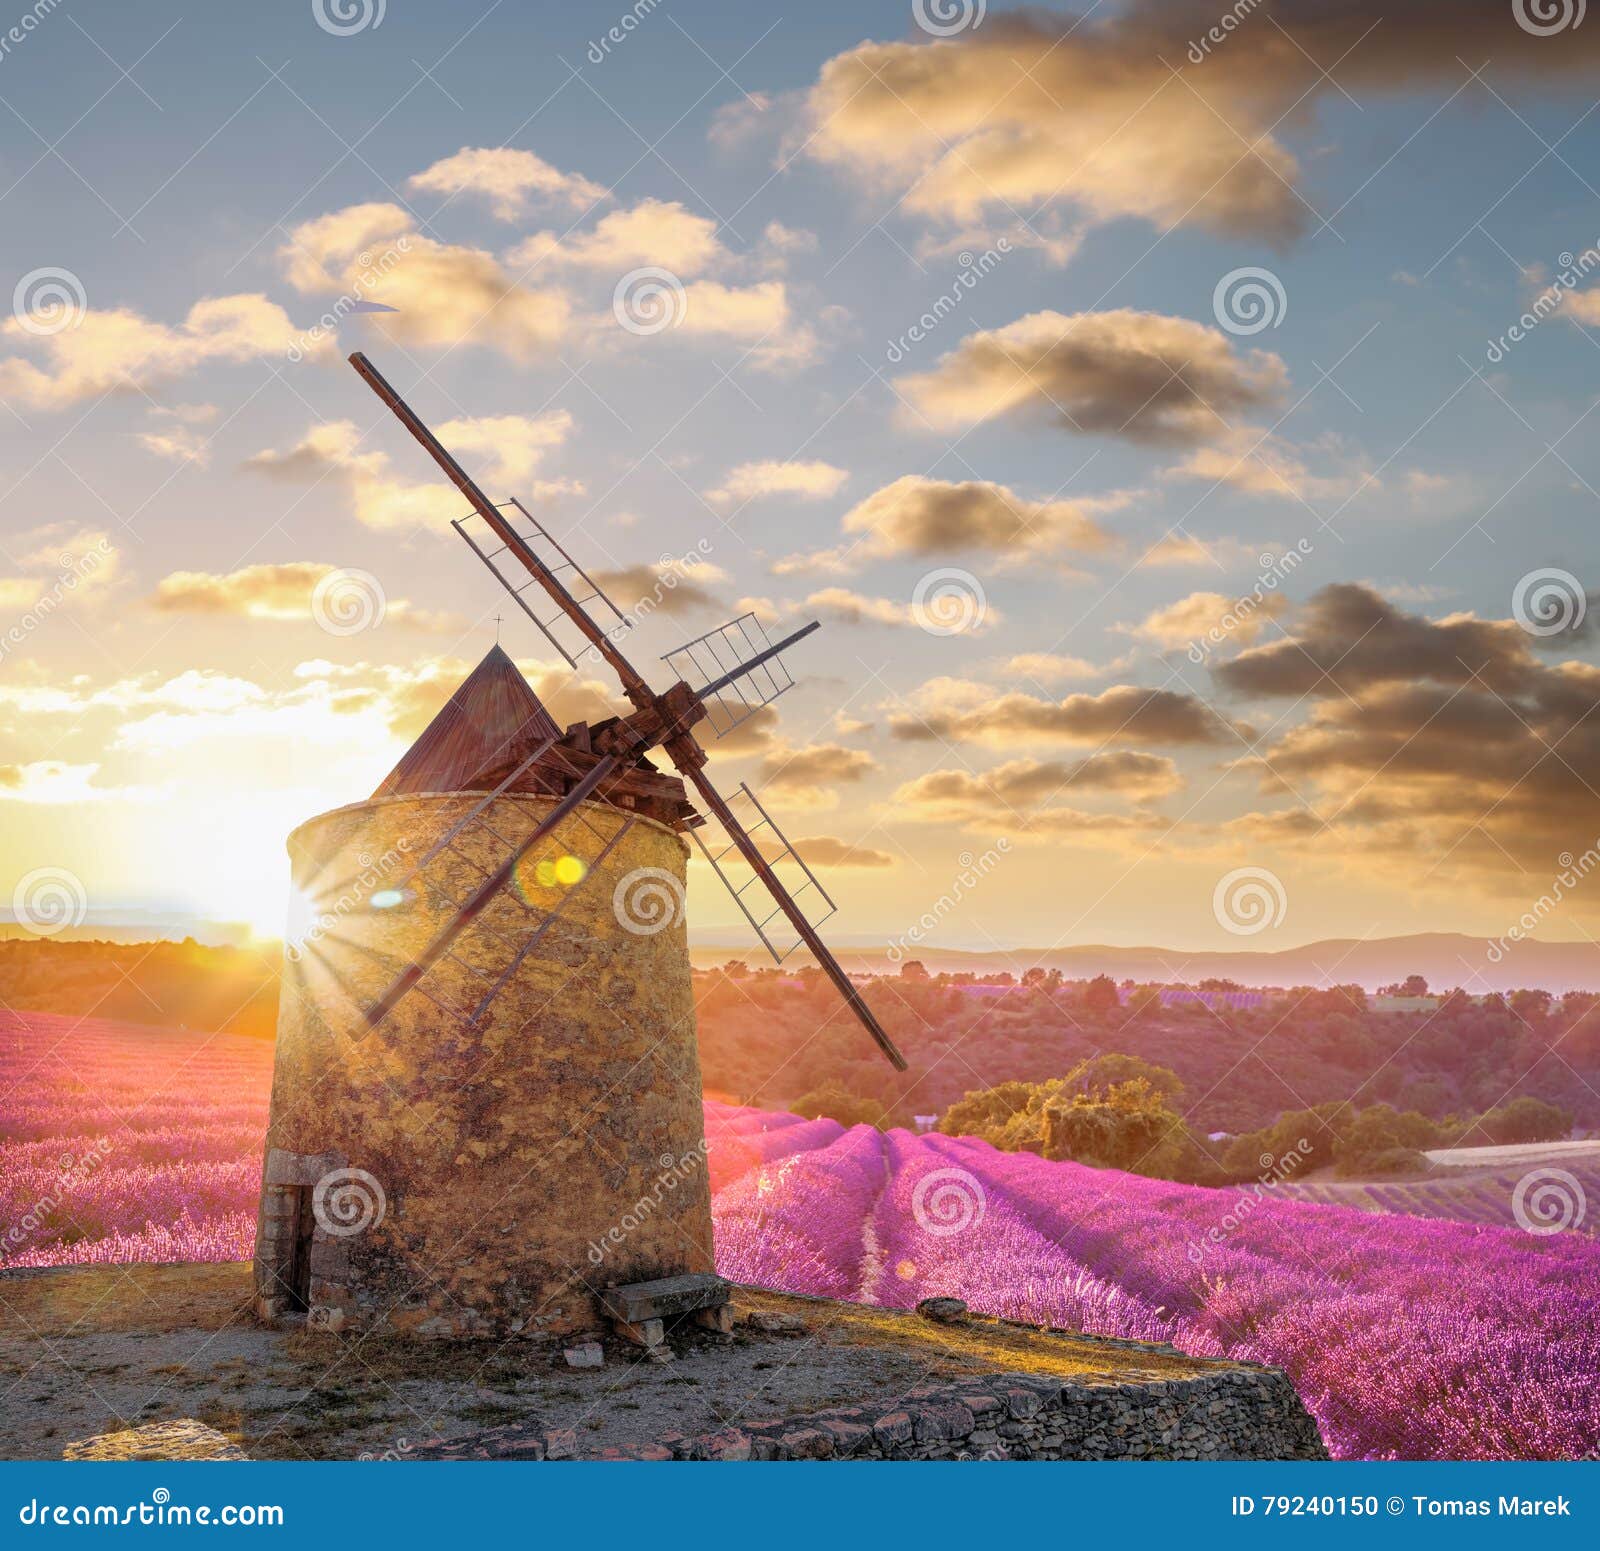 windmill with levander field against colorful sunset in provence, france